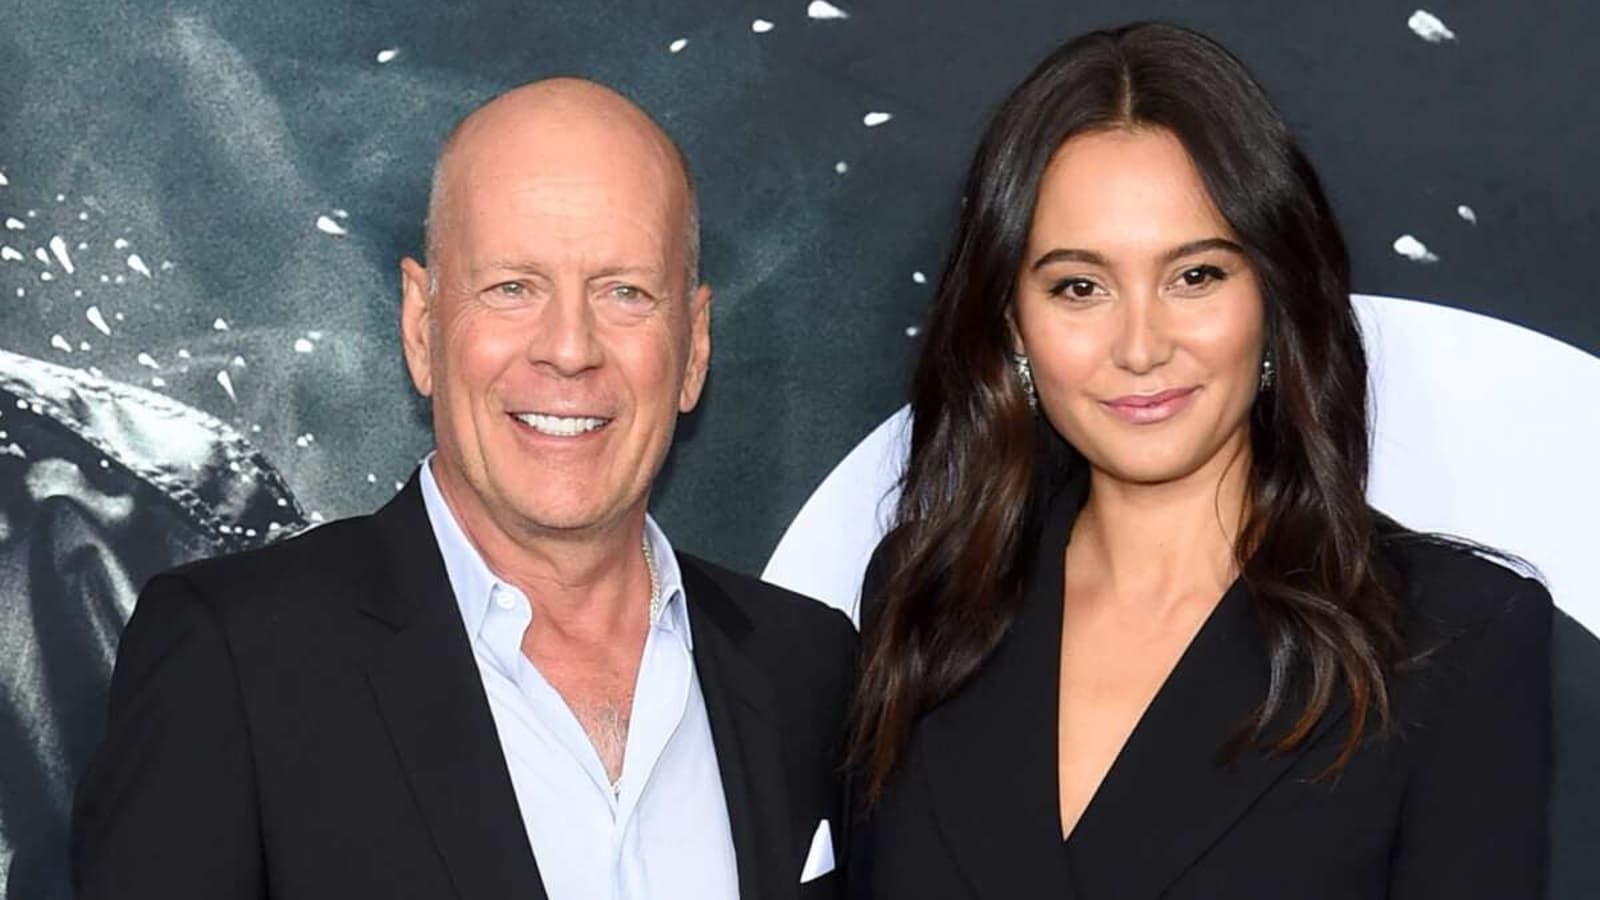 Bruce Willis' wife breaks silence on 'stupid' claims about his dementia battle: ‘Stop scaring people’